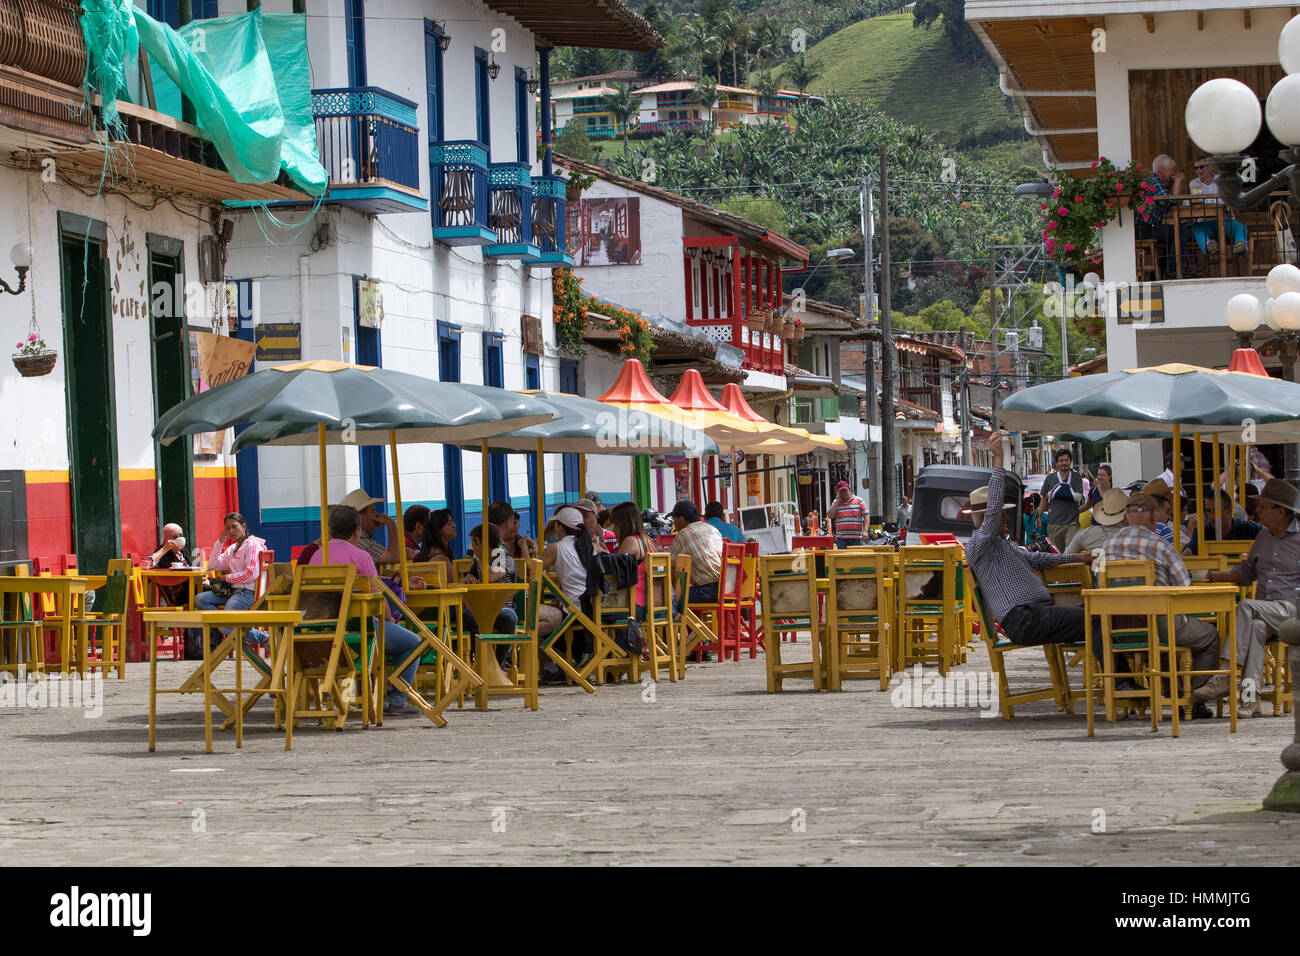 October 1, 2016 El Jardin, Colombia: the main plaza of the colonial town fills up with tourists on weekends Stock Photo